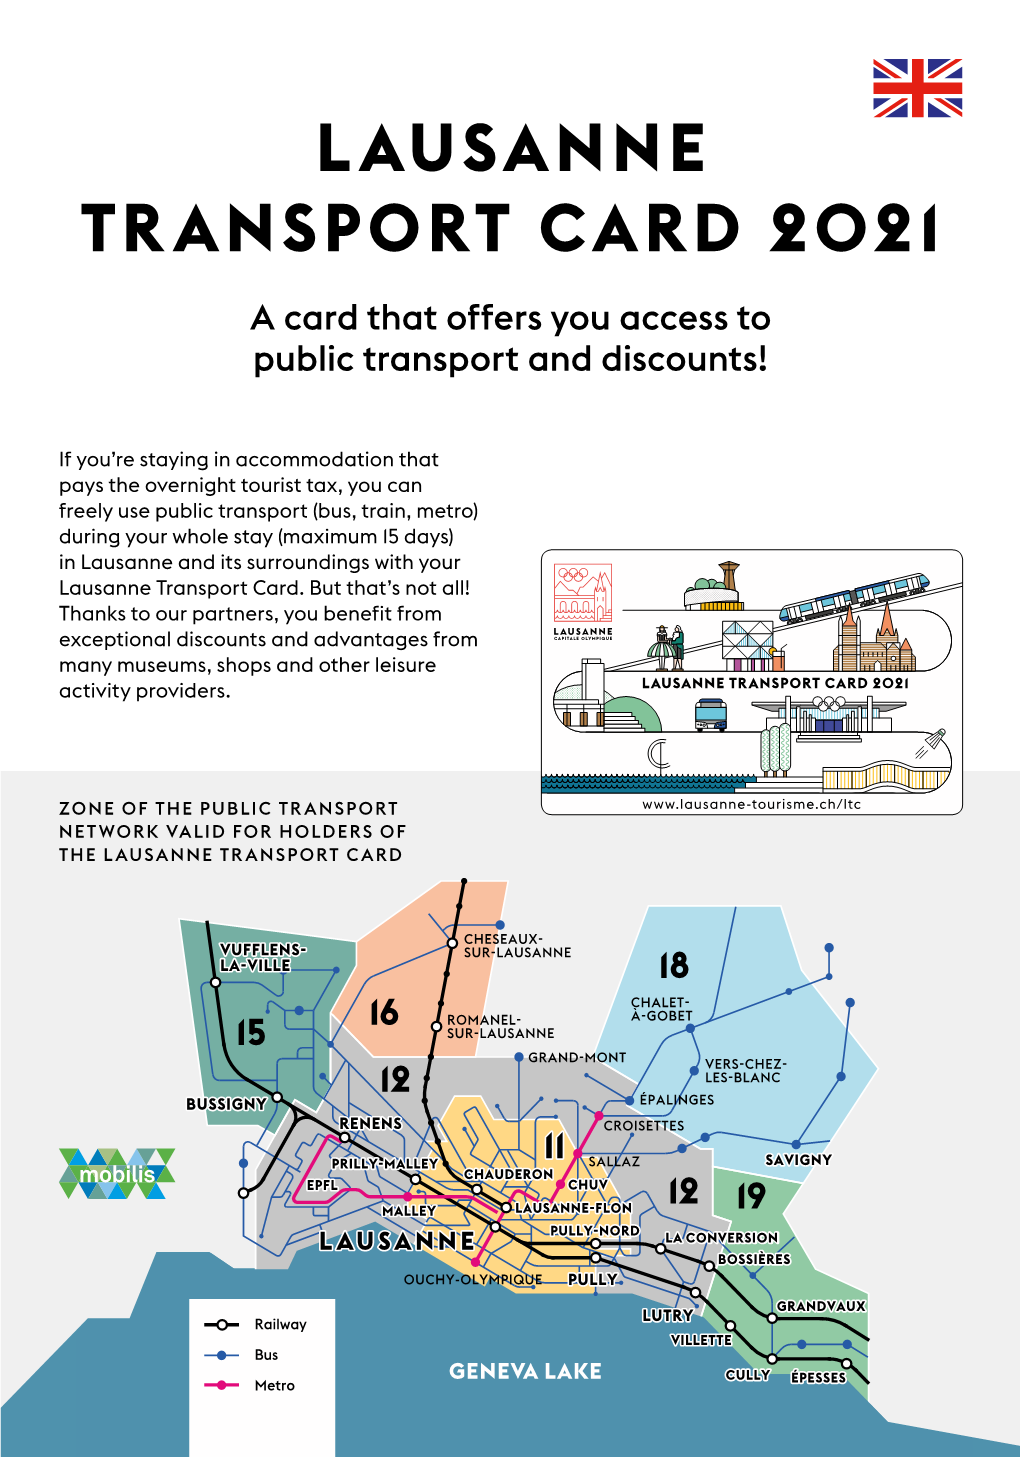 LAUSANNE TRANSPORT CARD 2021 a Card That Offers You Access to Public Transport and Discounts!